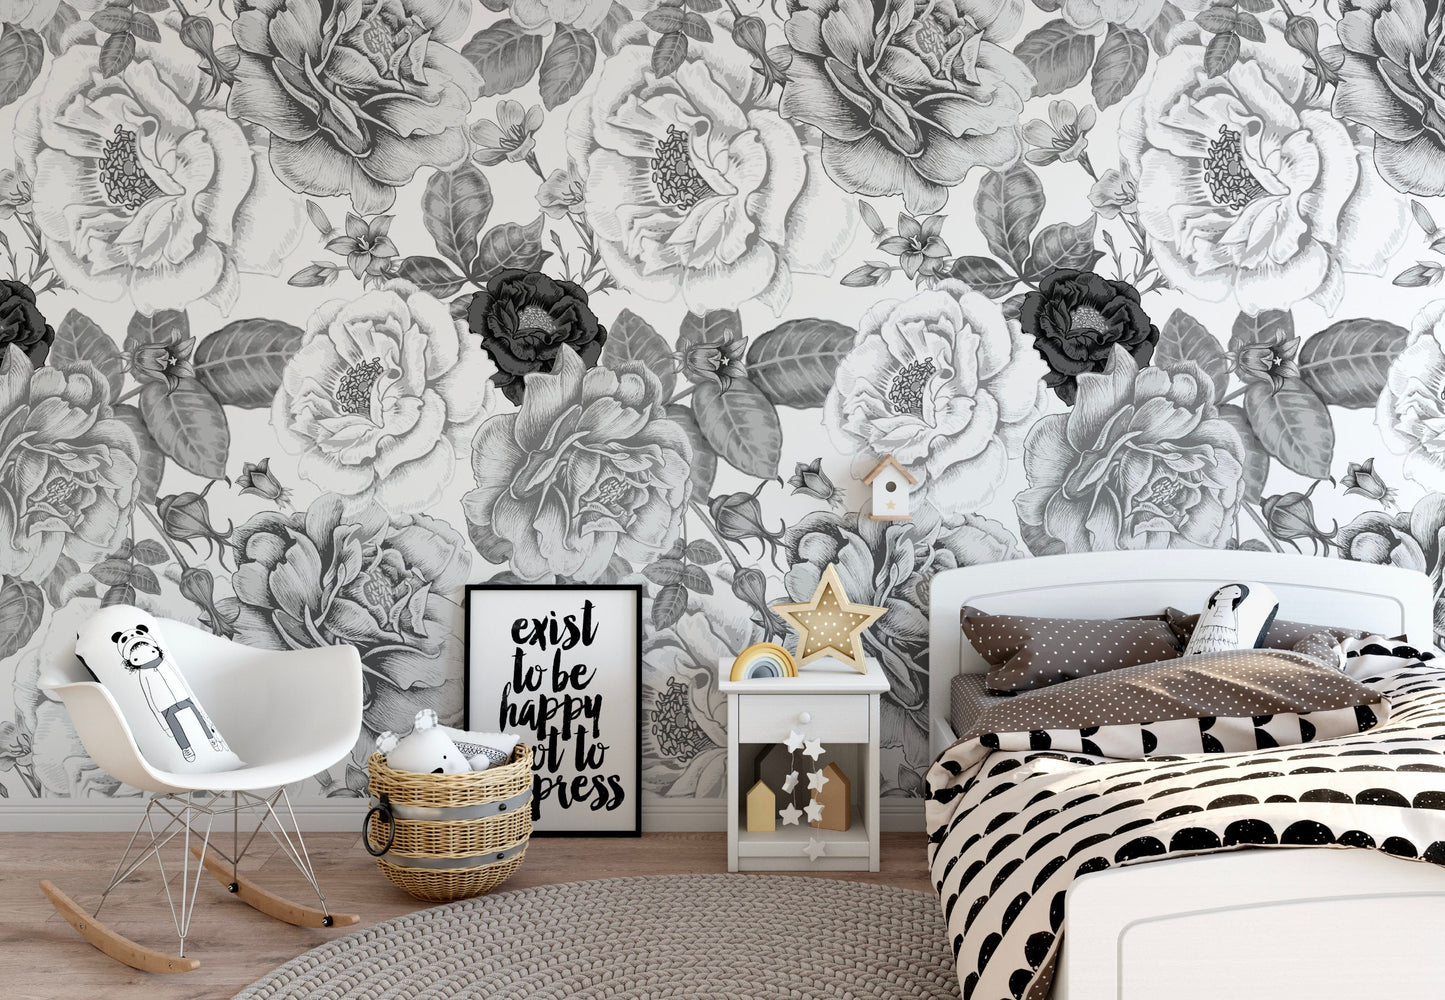 Peel and Stick Wallpaper Floral/ Vintage Black and White Roses Wallpaper/ Removable Wallpaper/ Unpasted Wallpaper/ Wallpaper WW1908